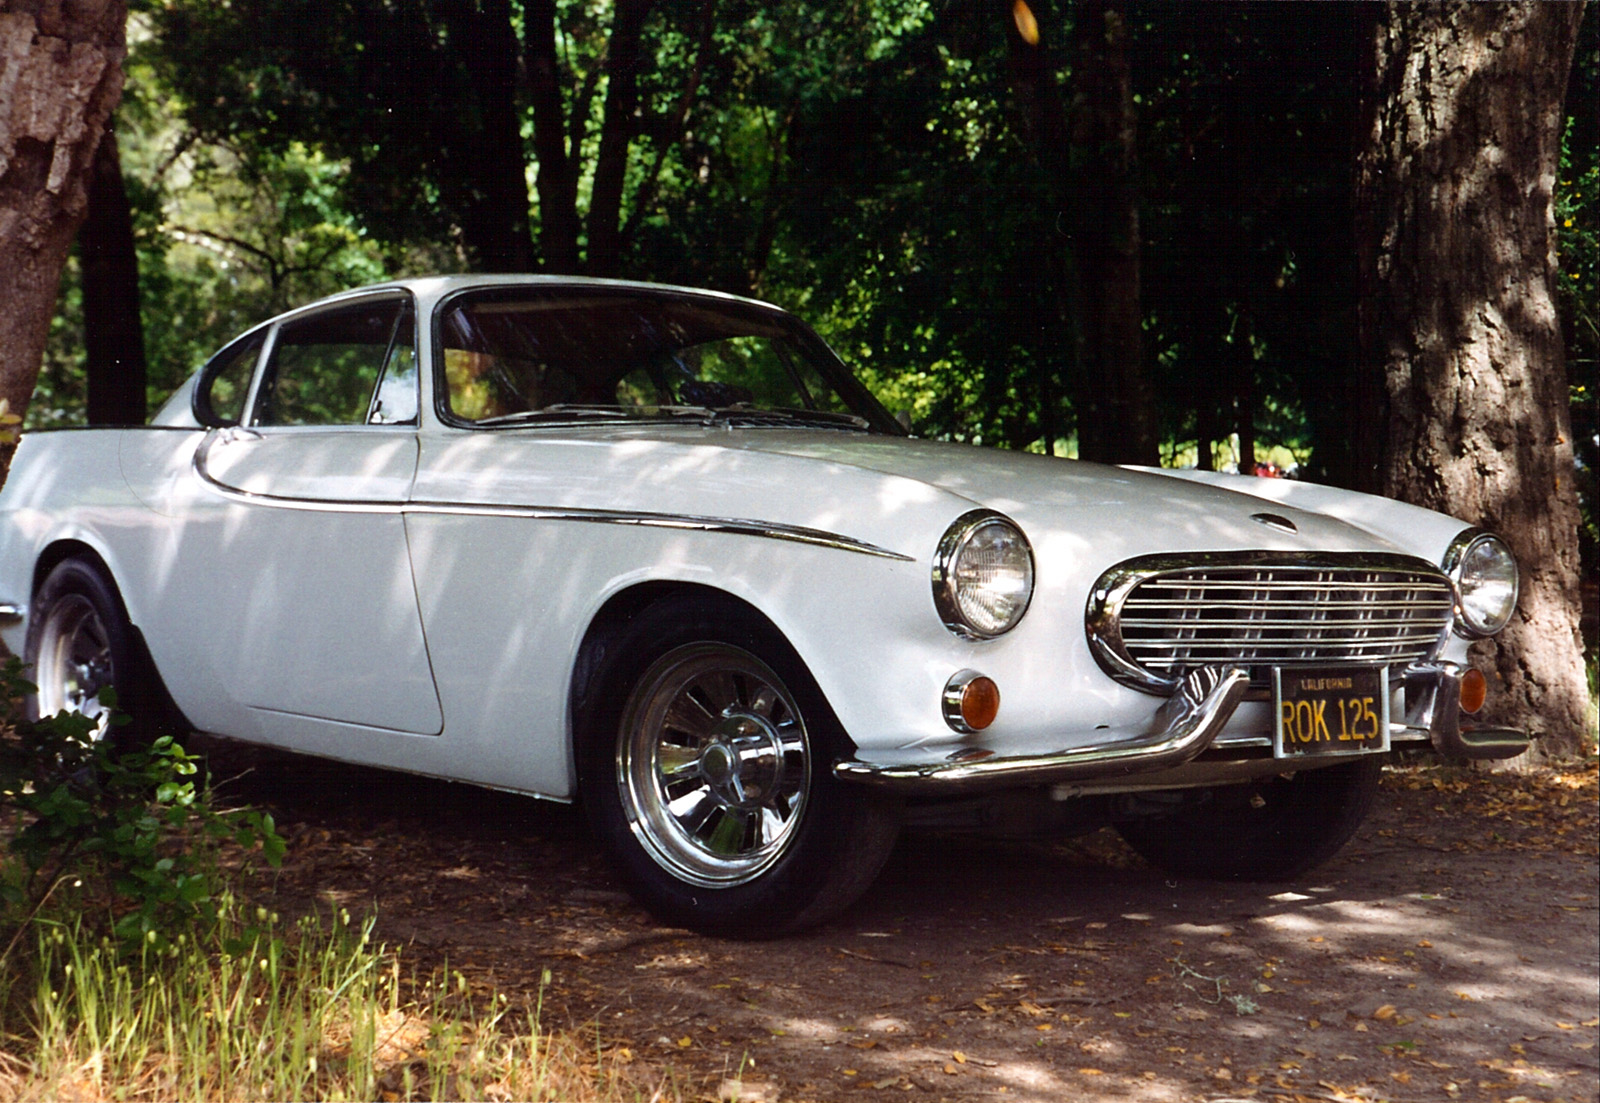 The passenger's side of Dan's 1964 Volvo 1800S in the shade